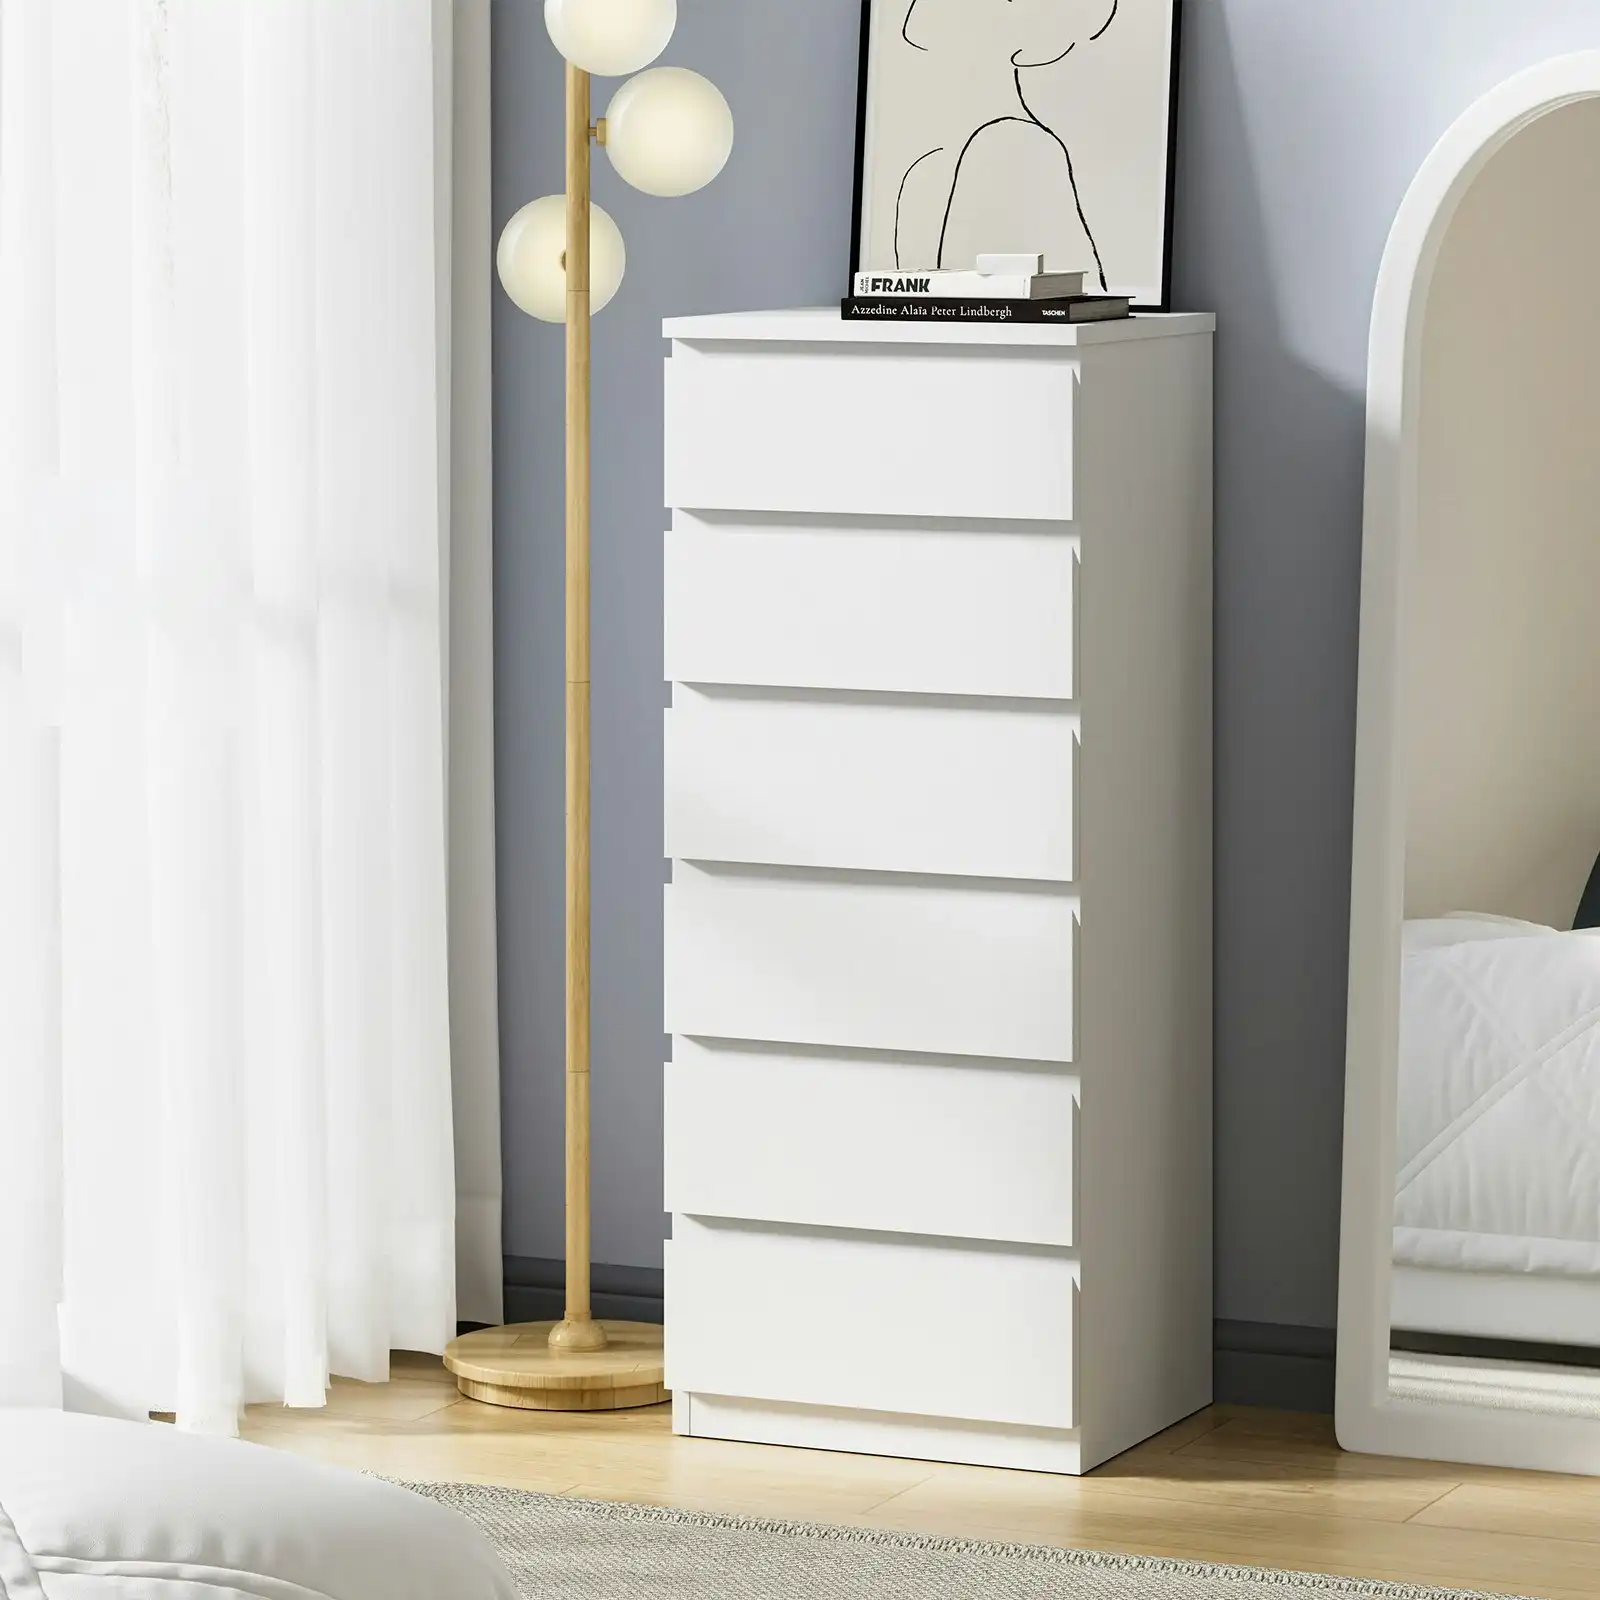 Oikiture 6 Chest of Drawers Tallboy Dresser Table Storage Cabinet Bedroom White